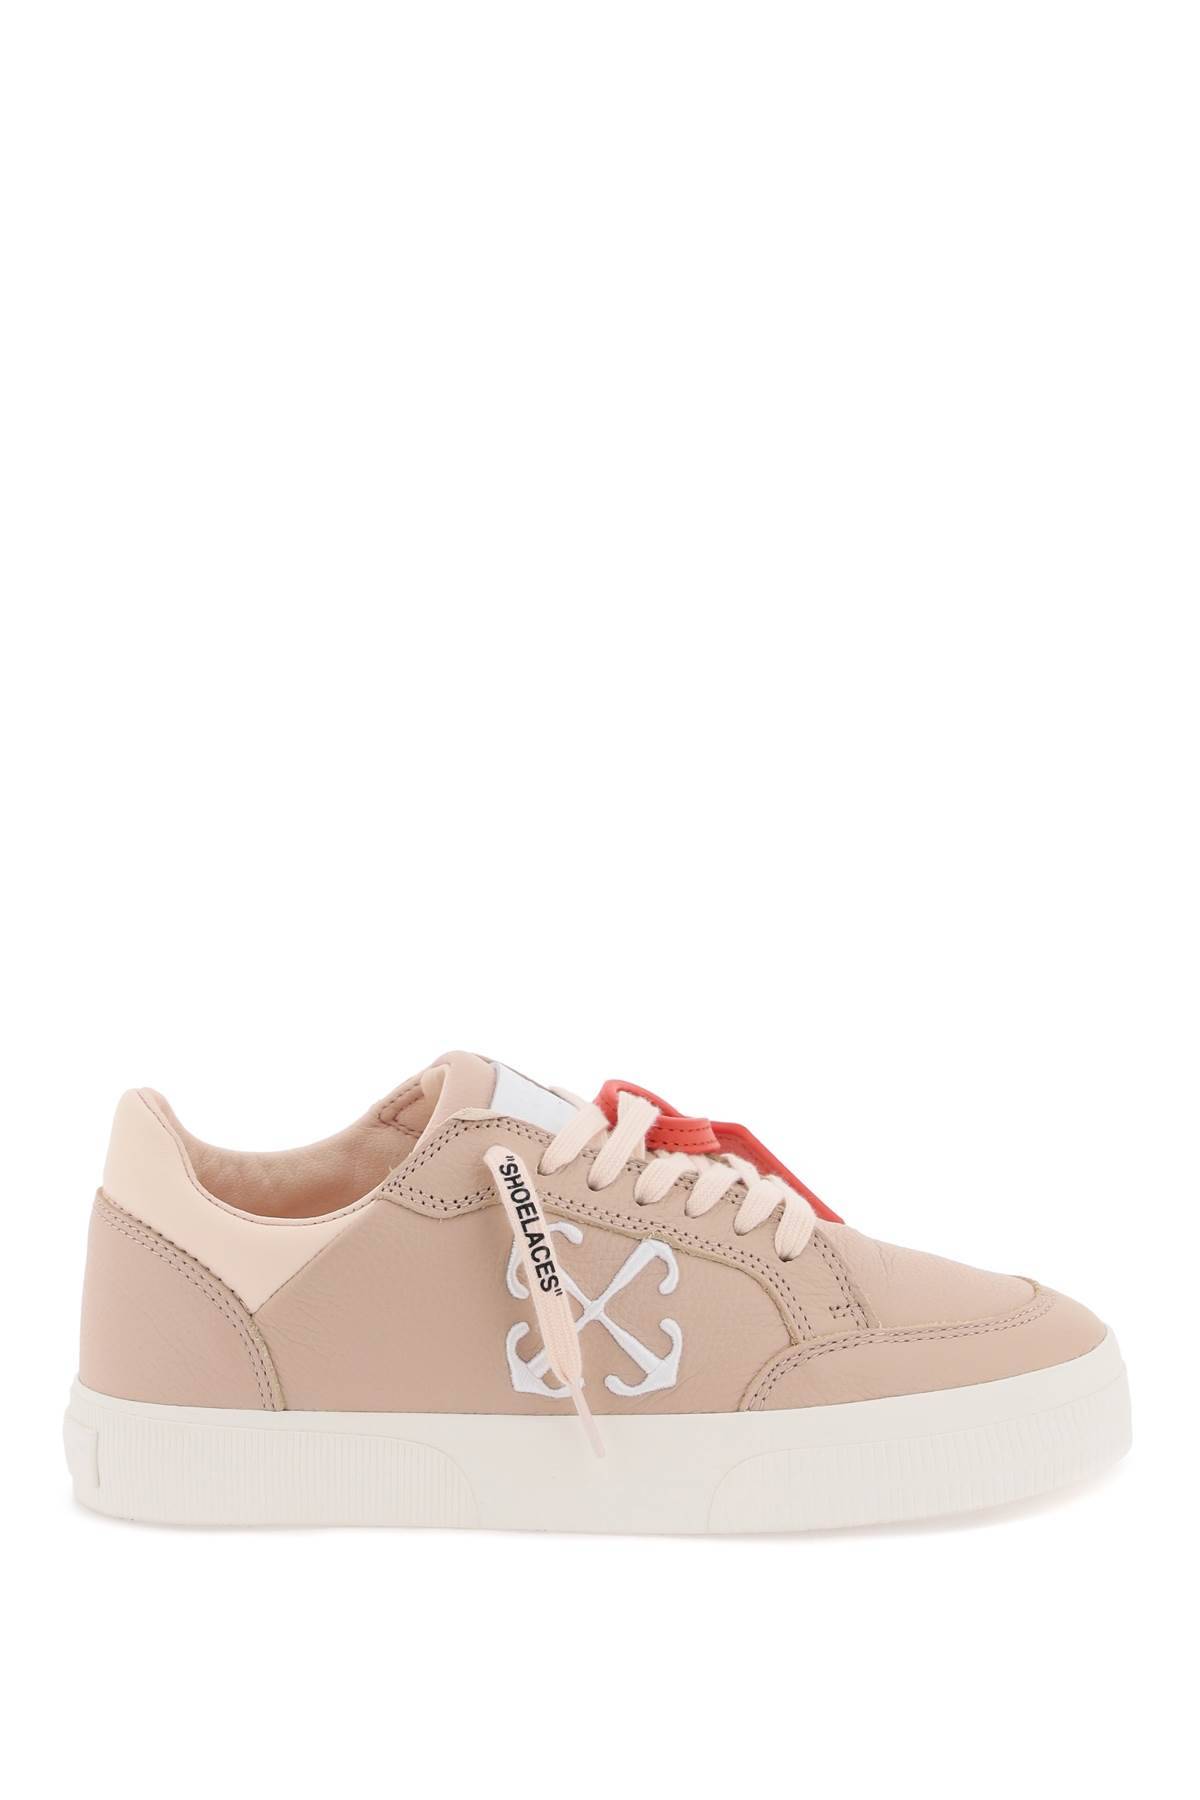 OFF-WHITE OFF-WHITE low leather vulcanized sneakers for